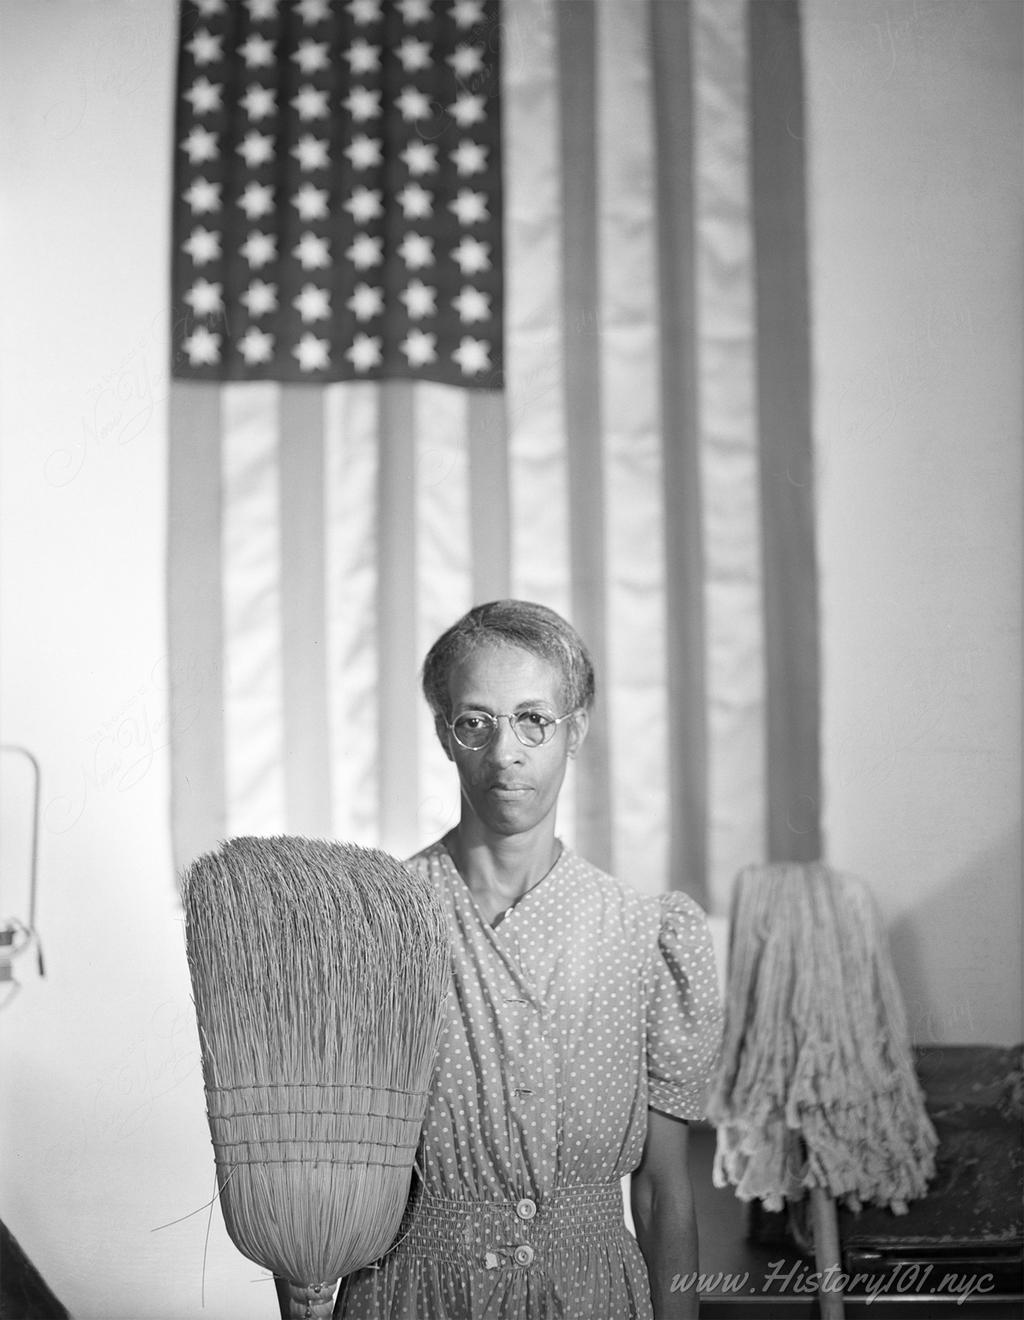 Portrait of Ella Watson standing in front of the American flag with mop and broom.